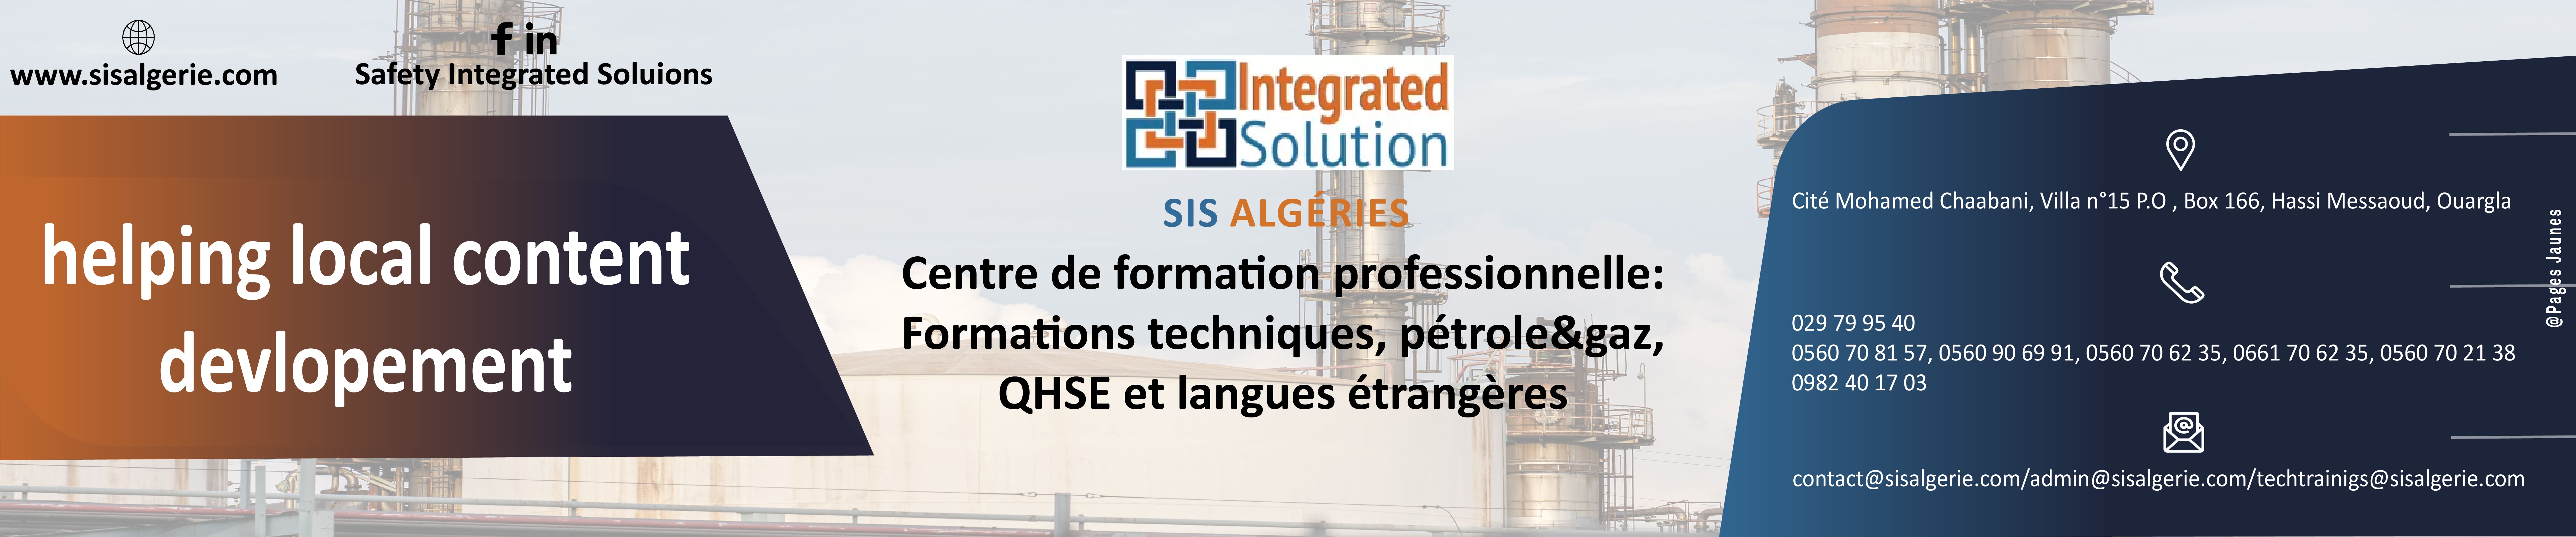 SIS ALGÉRIE SAFETY INTEGRATED SOLUTIONS